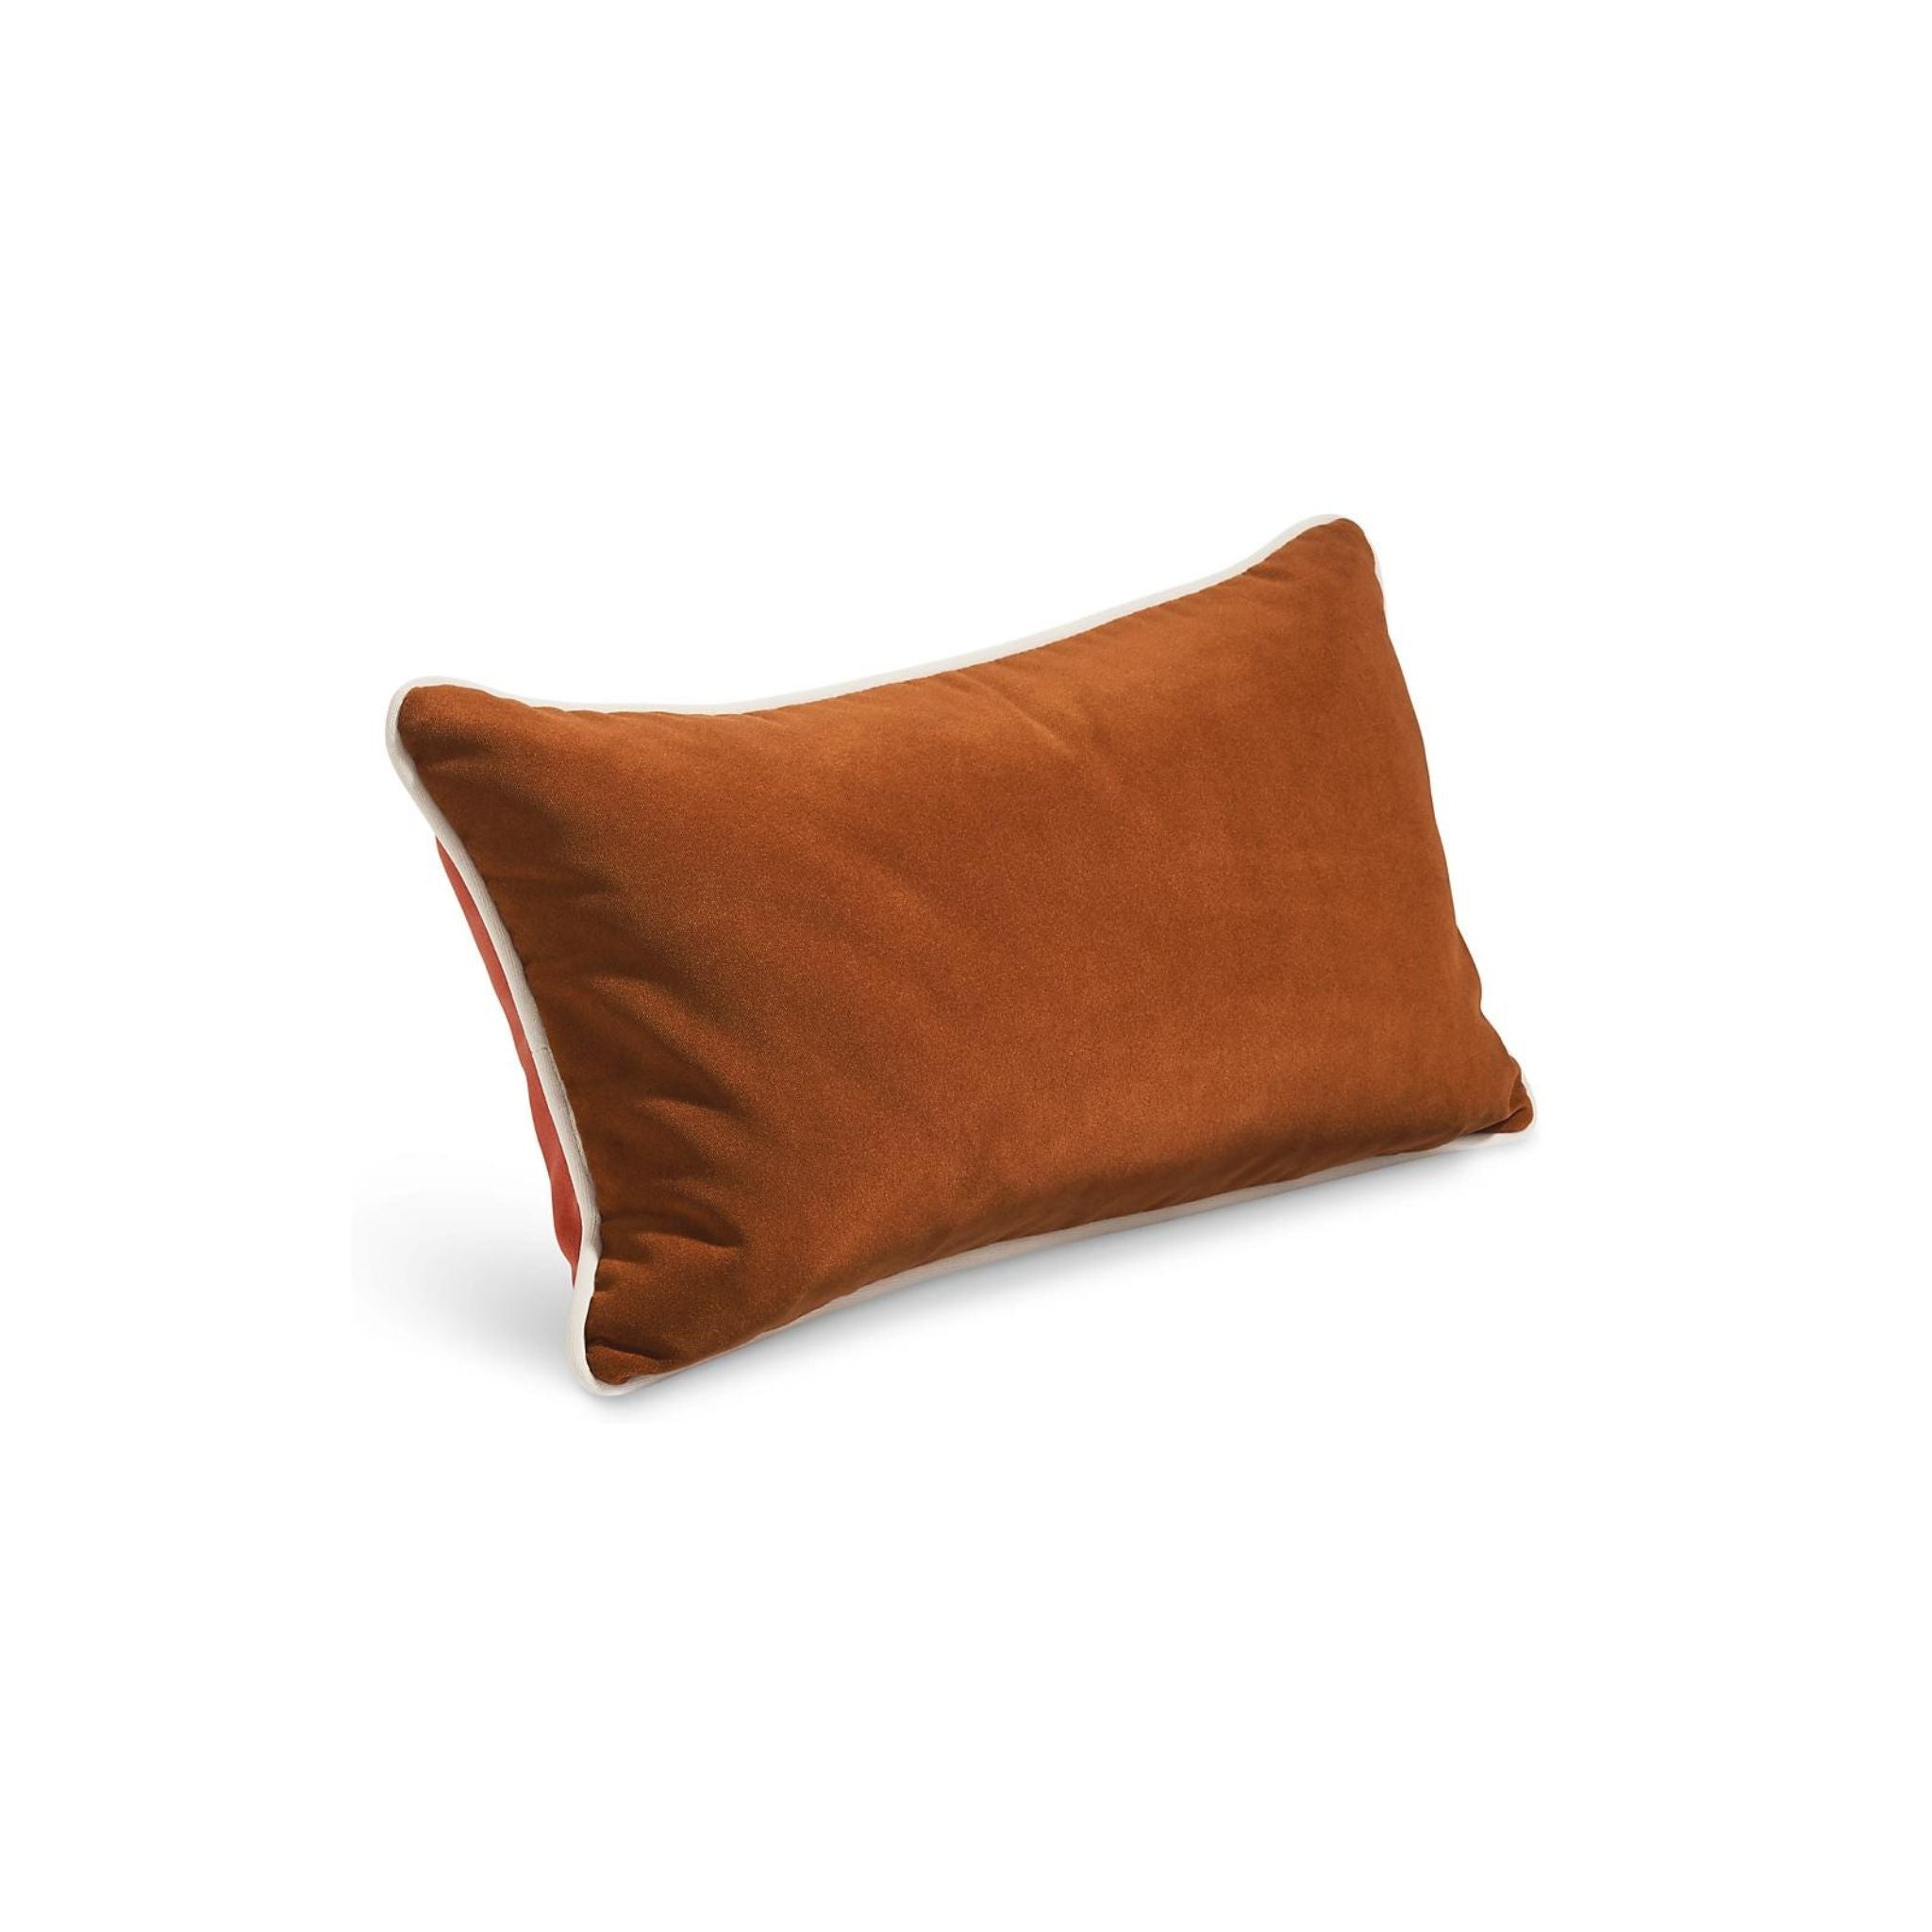 Our Jinx pillow brings the timeless appeal of velvet outdoors. Featuring a two-tone design with a piping border detail, each of these modern outdoor throw pillows is available in timeless colors for easy styling.